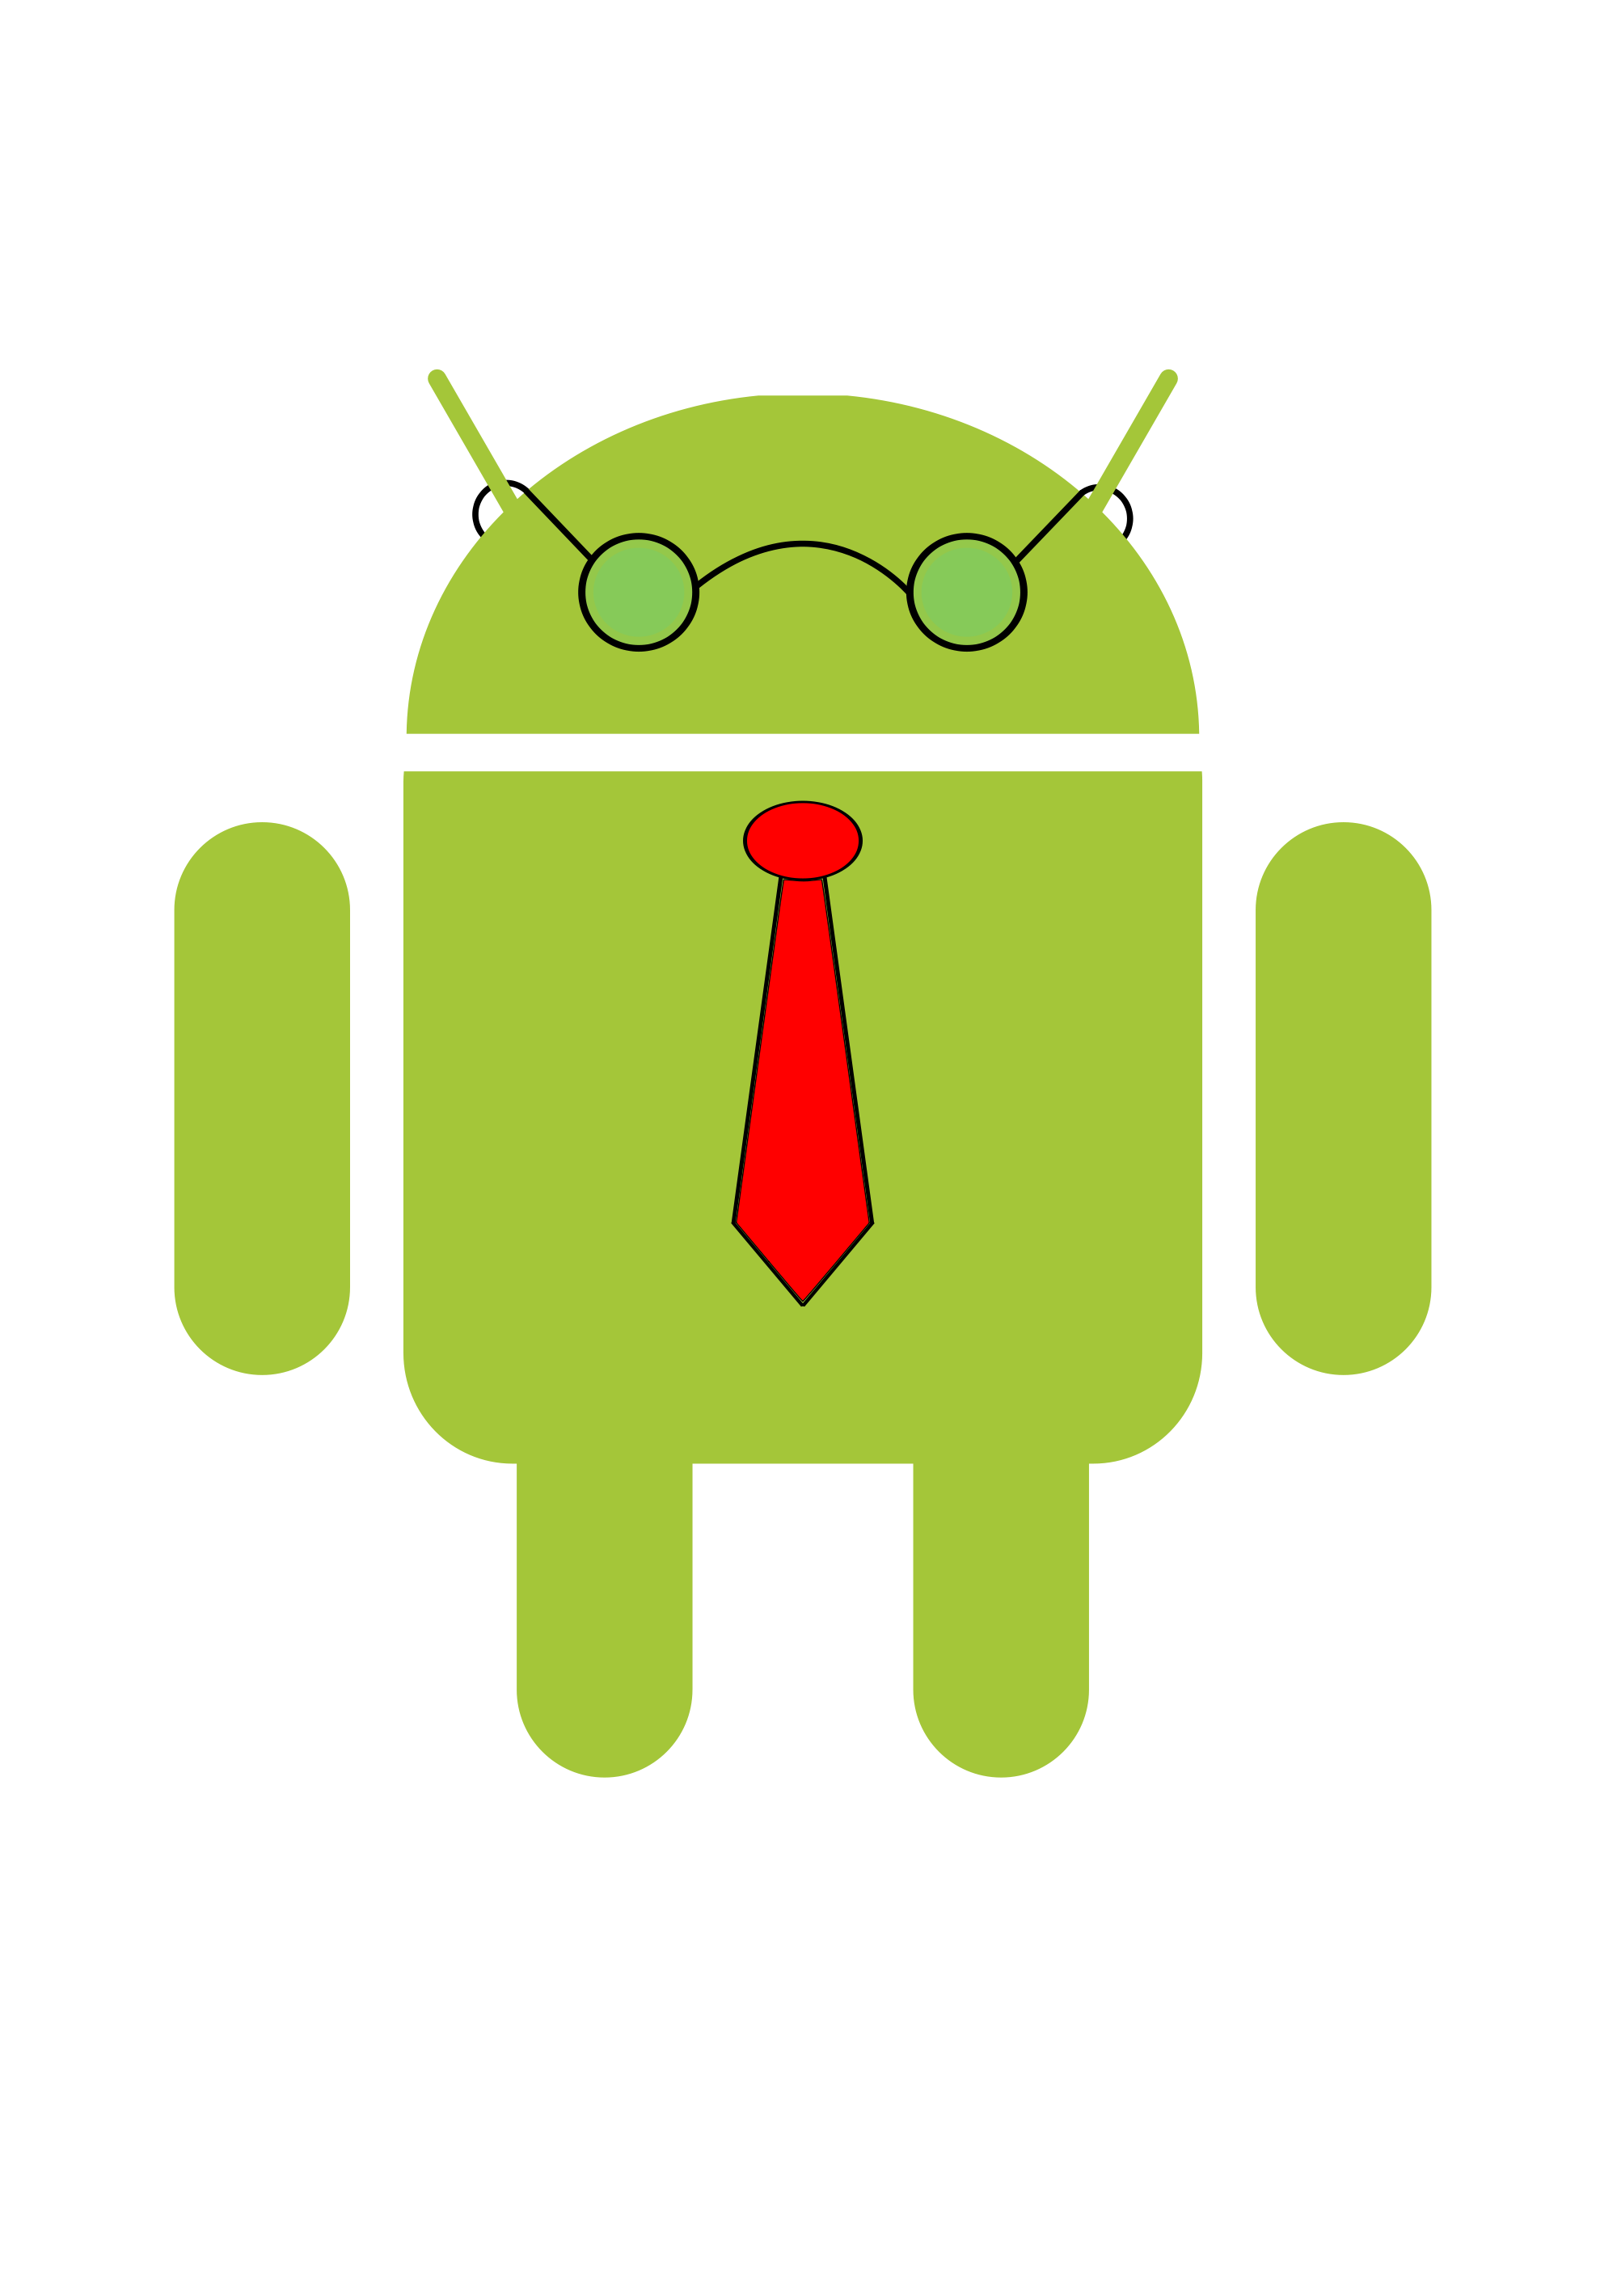 Android Logo 2021 Android Apps Crashing Randomly For You Too Heres